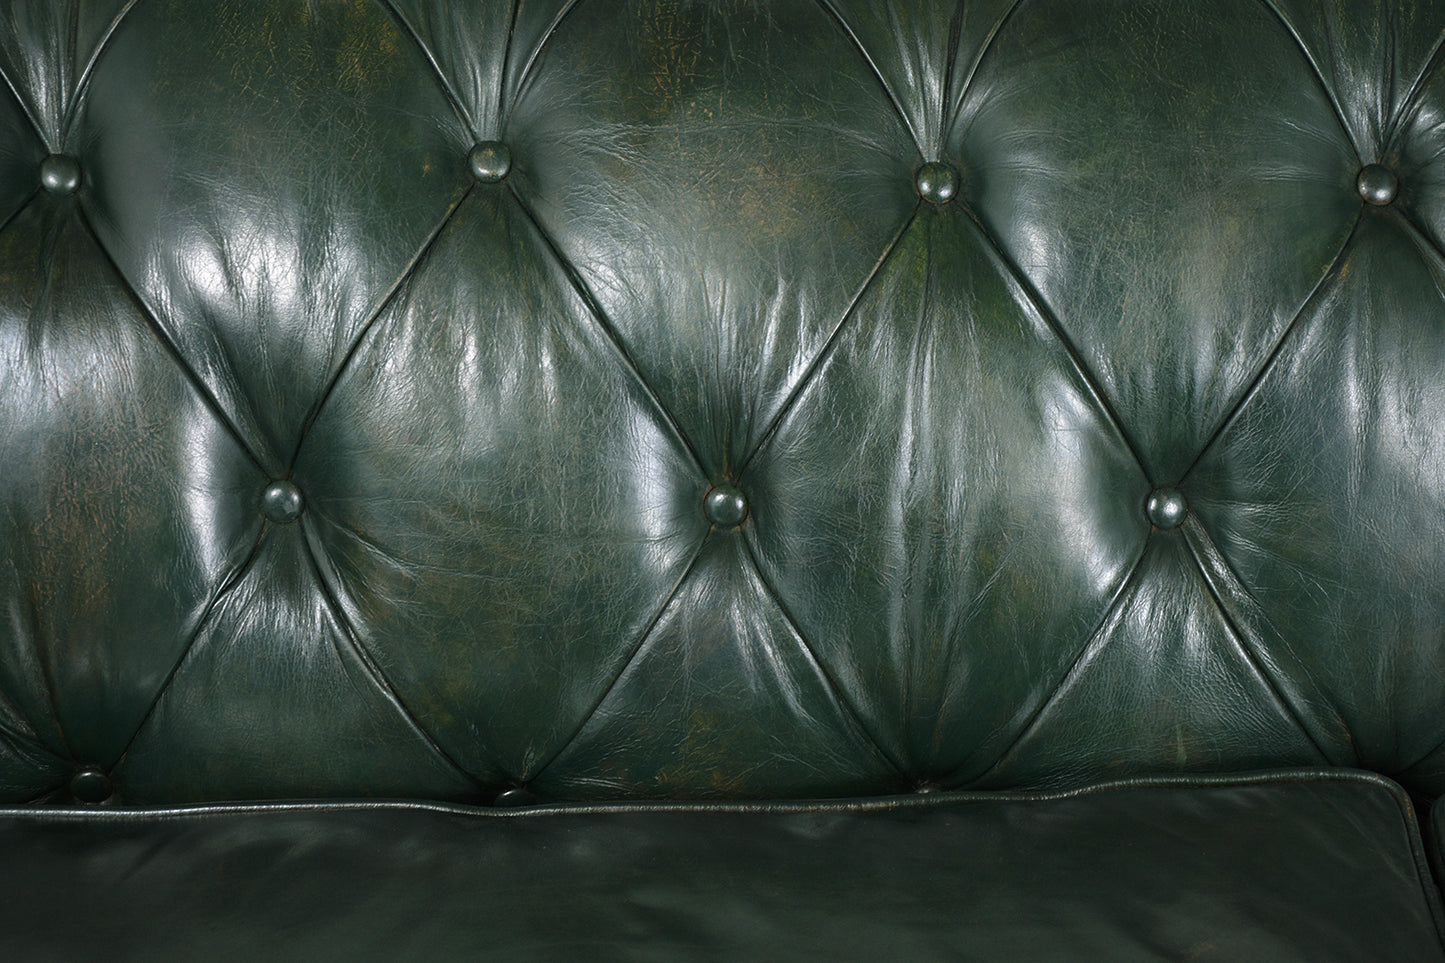 Green Leather Chesterfield Sofa